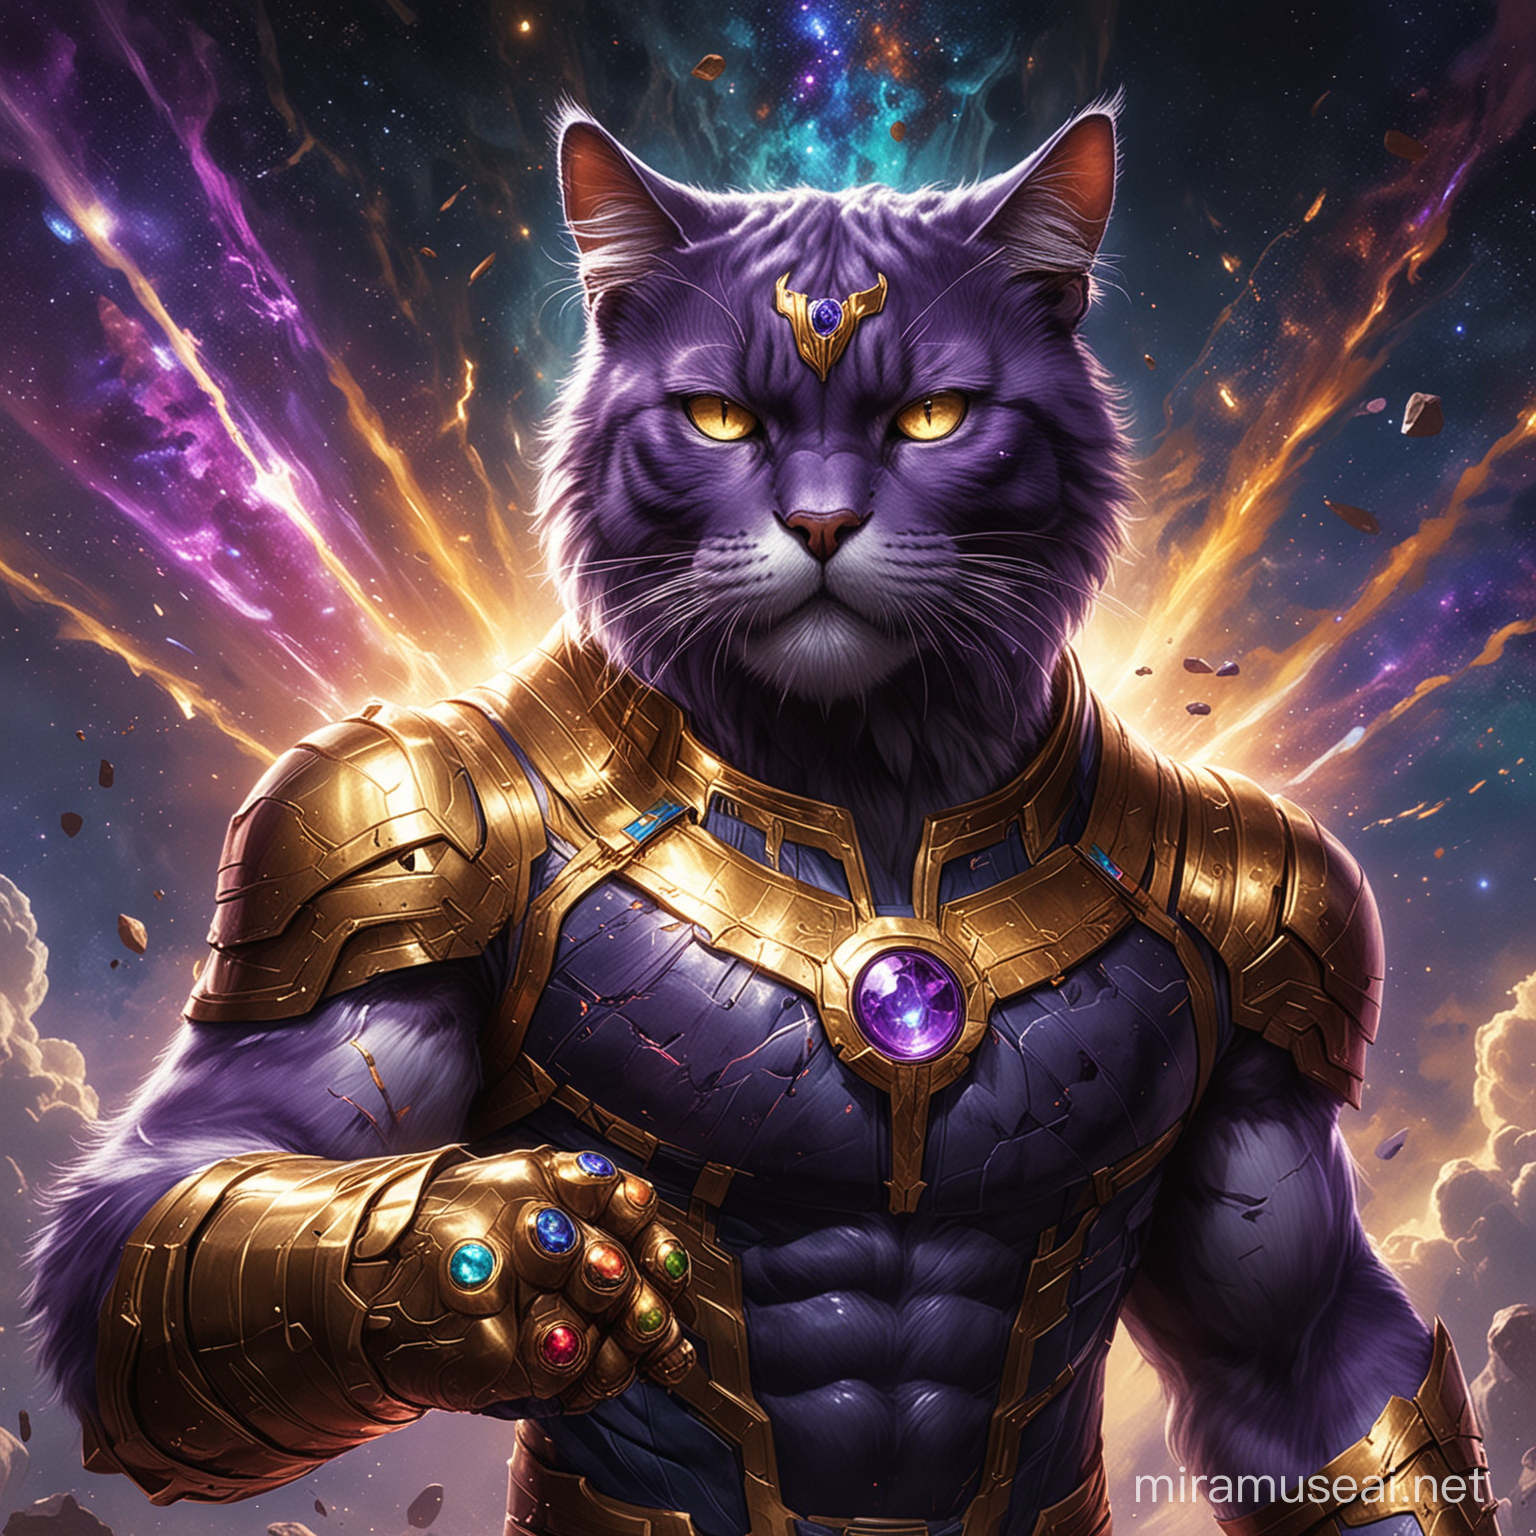 a formidable and majestic cat assumes the guise of Thanos from Marvel, adorned with the Infinity Gauntlet, each of its stones radiating a distinct hue. The cat's fur echoes a regal purple, akin to Thanos' armor, while its feline eyes gleam with cosmic power. With confident poise, the cat brandishes the multicolored Infinity Gauntlet, each gem pulsating with its unique energy. This portrayal captures the feline figure as a dominant force, poised to wield the unfathomable power of the universe, its expression conveying both determination and a hint of sinister resolve.









